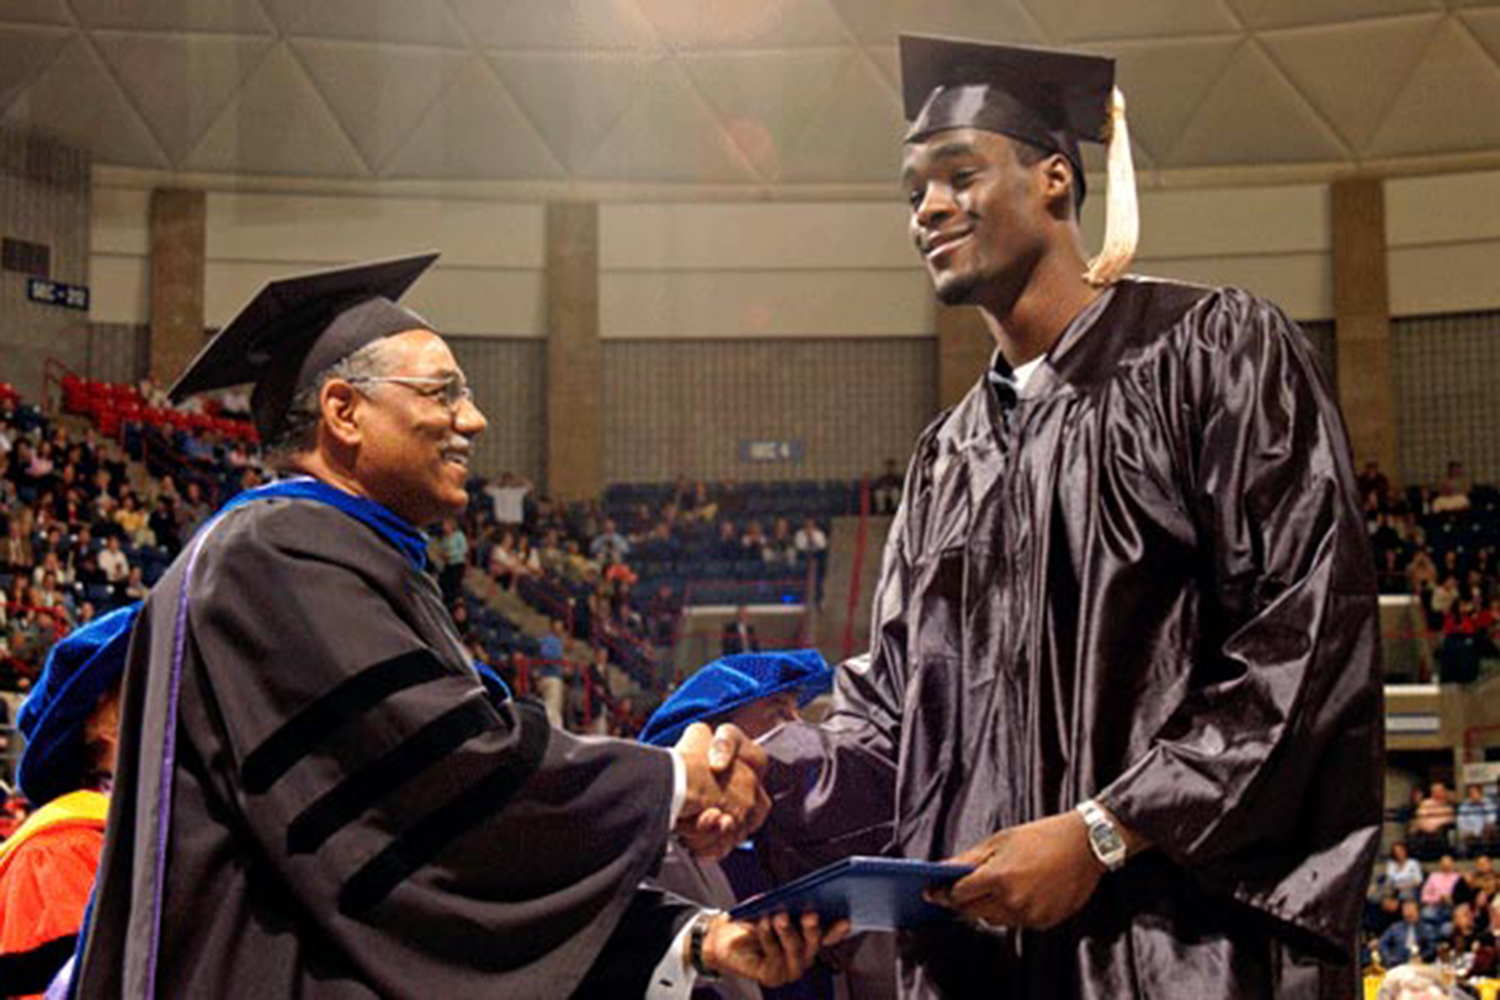 Emeka Okafor receives his diploma from former School of Business Dean Curt Hunter during Commencement ceremonies at Gampel Pavilion in May 2004. ( Ryan McKee/NCAA Photos)